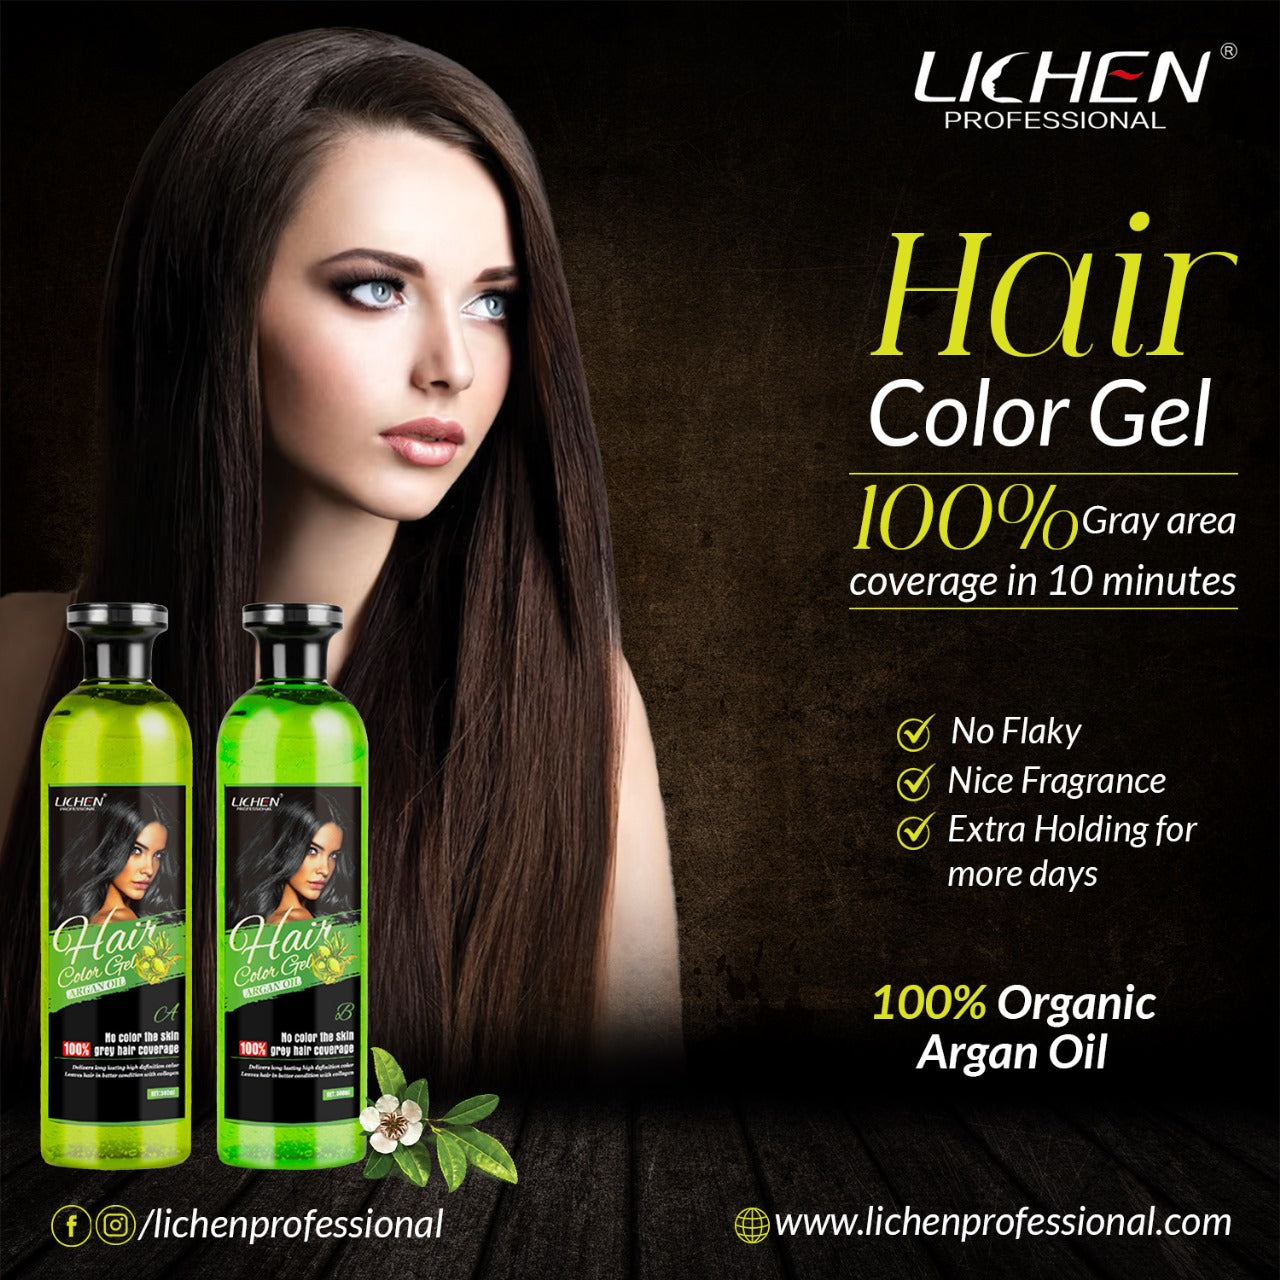 Lichen Professional's Hair Color Gel: Salon-Quality Results from the Comfort of Home